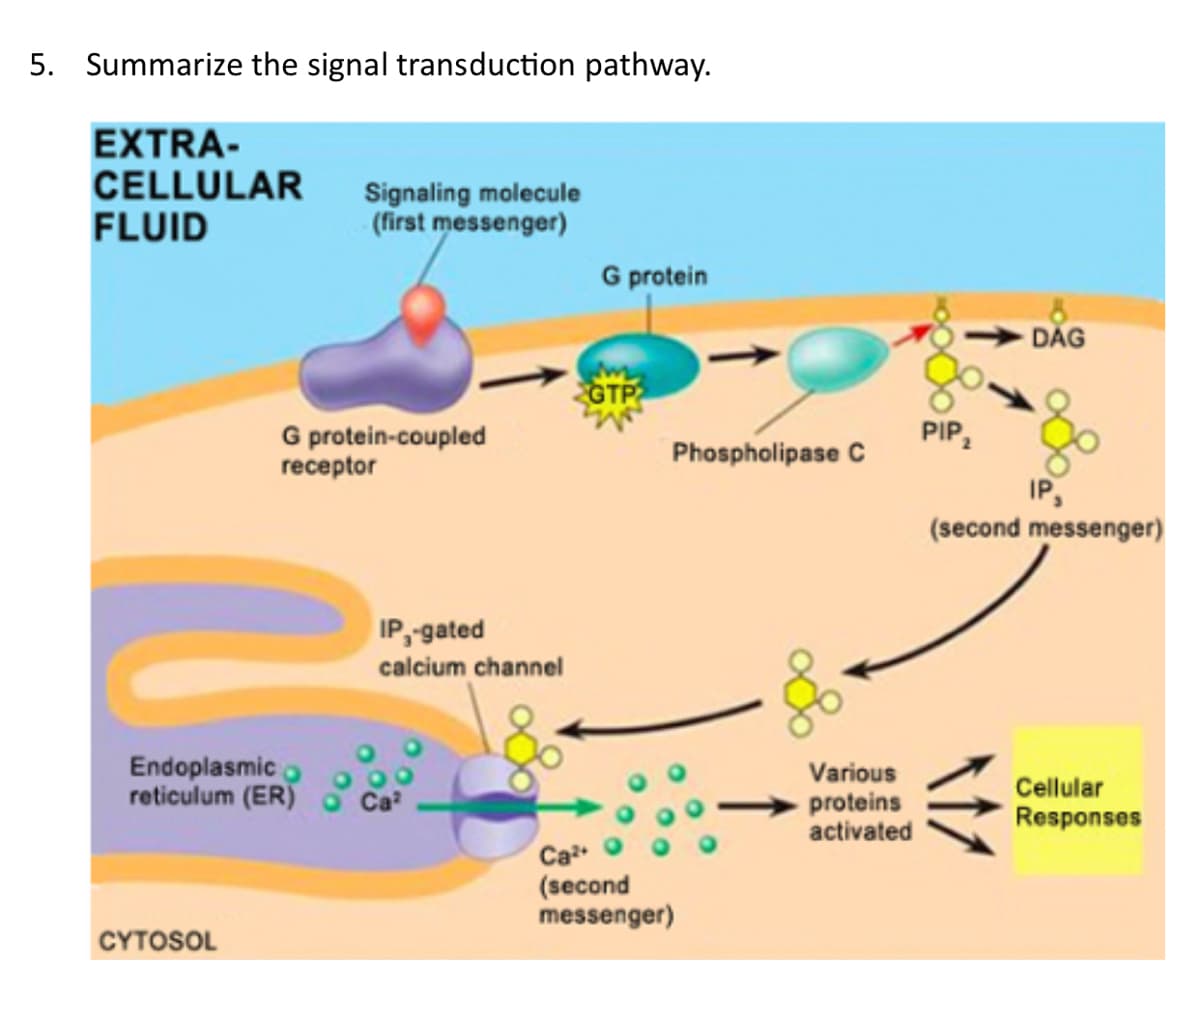 5. Summarize the signal transduction pathway.
EXTRA-
CELLULAR
FLUID
Signaling molecule
(first messenger)
G protein
DAG
GTP
PIP2
G protein-coupled
receptor
Phospholipase C
IP,
(second messenger)
IP,-gated
calcium channel
Endoplasmic
reticulum (ER)
Various
Ca
proteins
activated
Cellular
Responses
Ca
(second
messenger)
CYTOSOL
